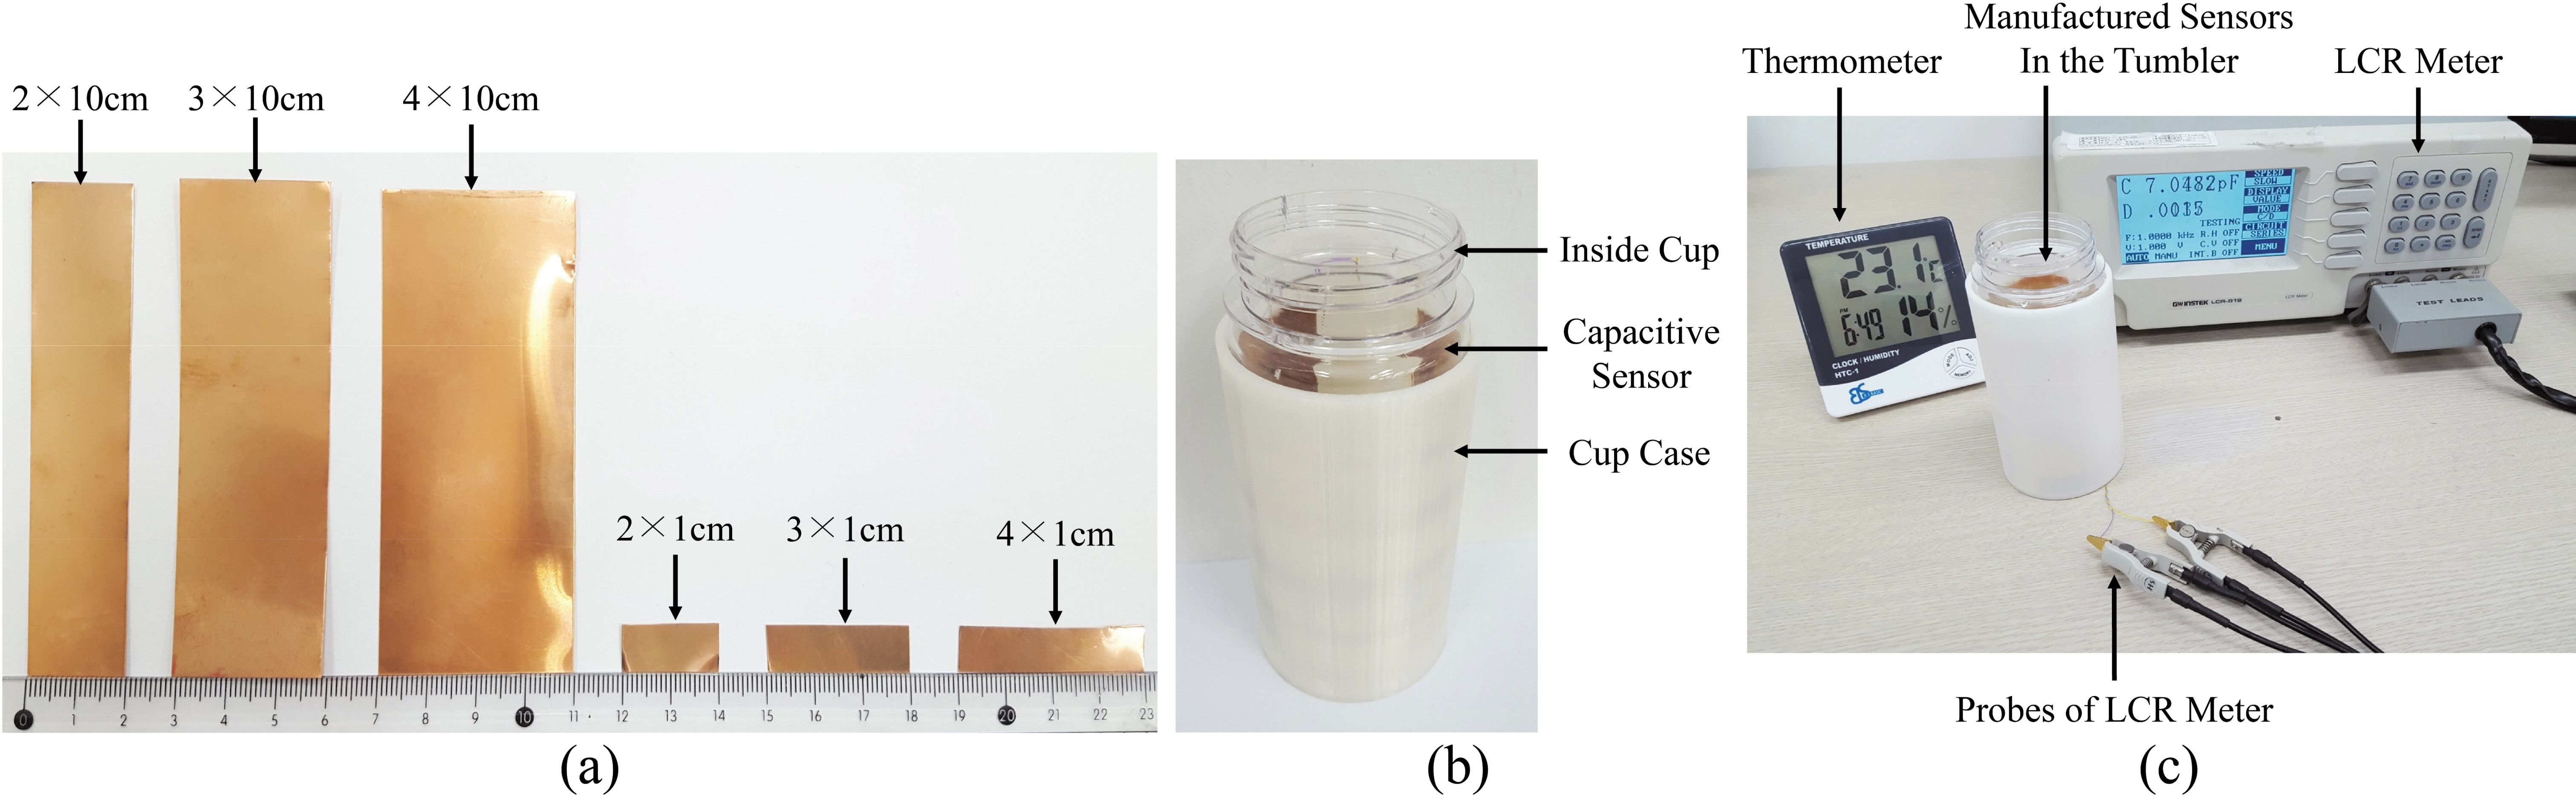 Pictures of the fabricated capacitive sensor assembled with the tumbler to conduct the performance test. (a) Manufactured variety width of electrodes for capacitive sensor; (b) capacitive sensor assembled in the tumbler; (c) assembled tumbler connected with an LCR to acquire the capacitance value.